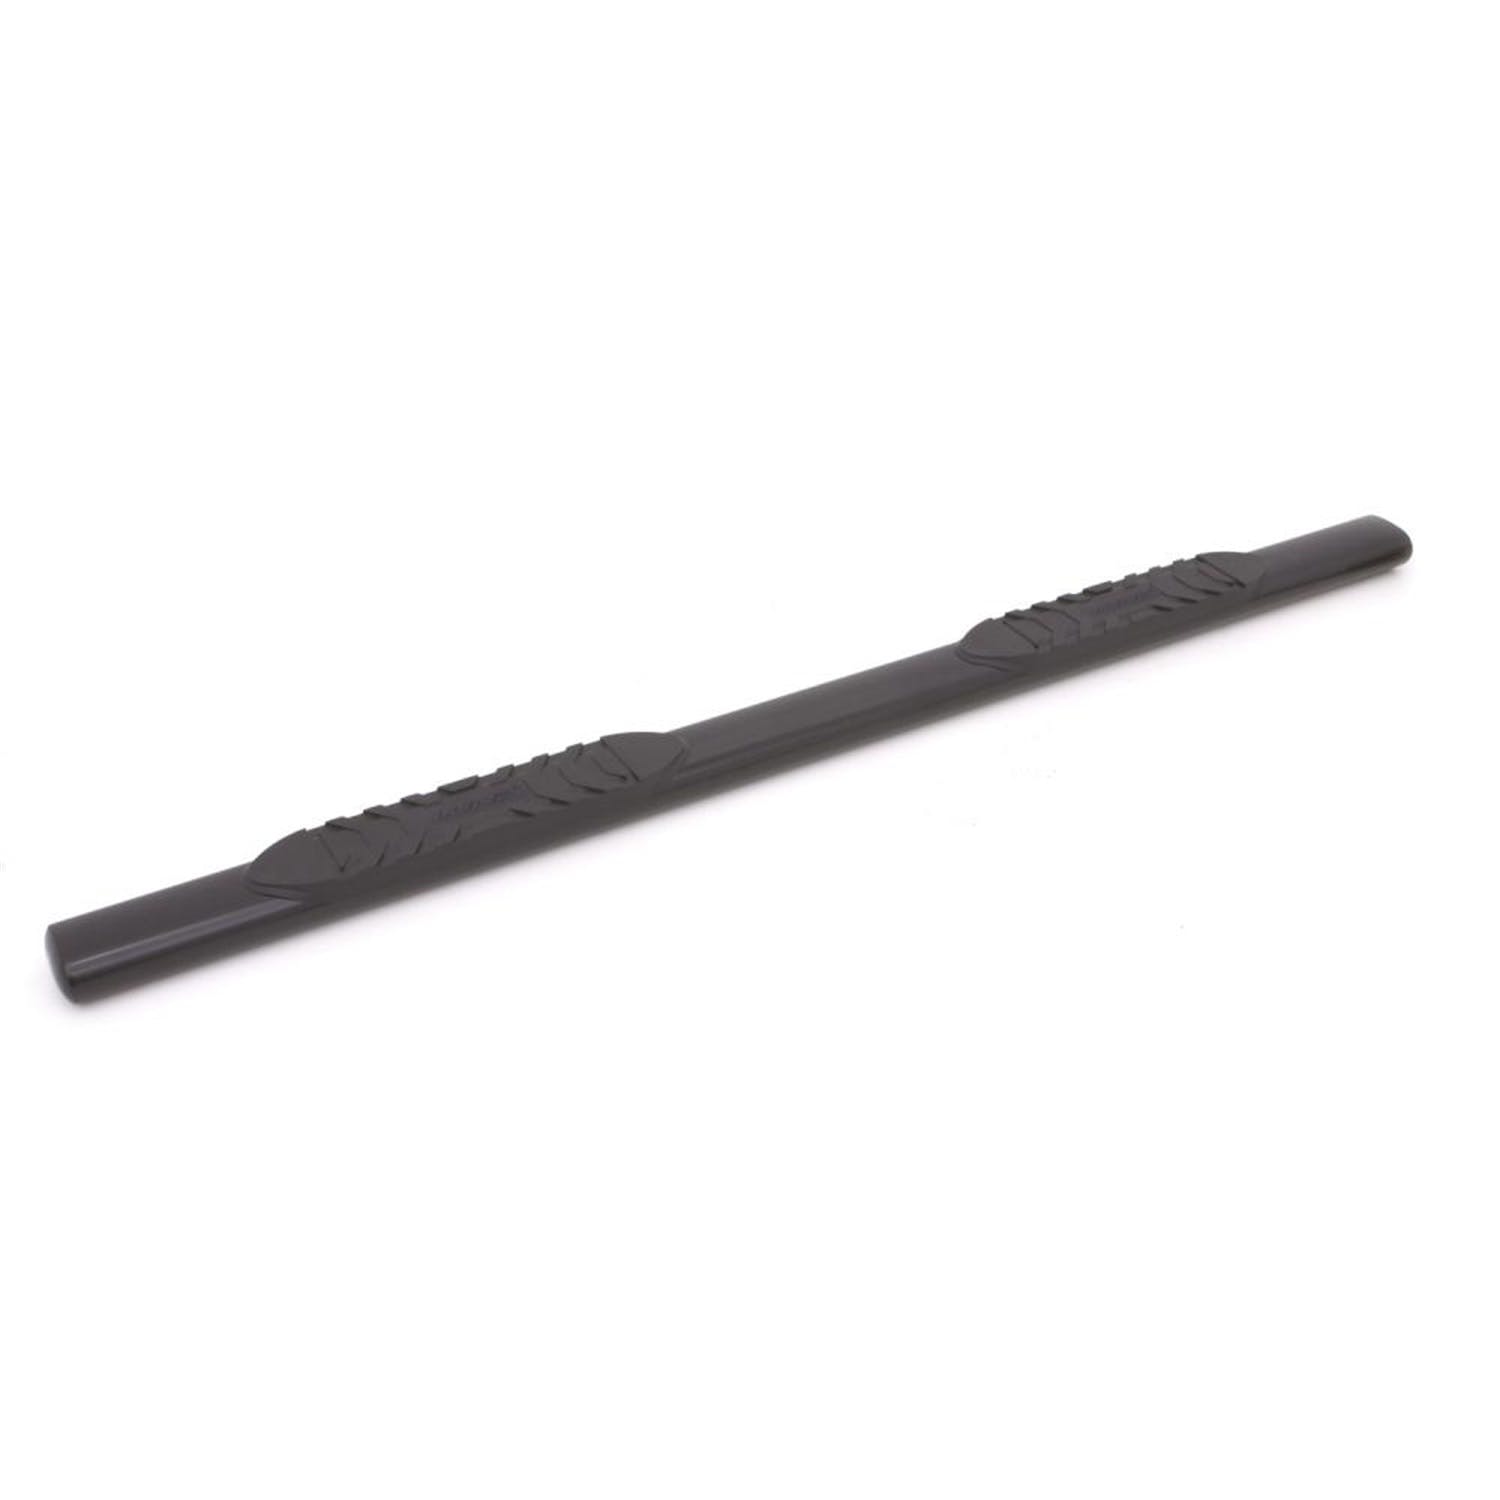 LUND 24076006 5 Inch Oval Straight Nerf Bar - Black 5 In OVAL STRAIGHT STEEL